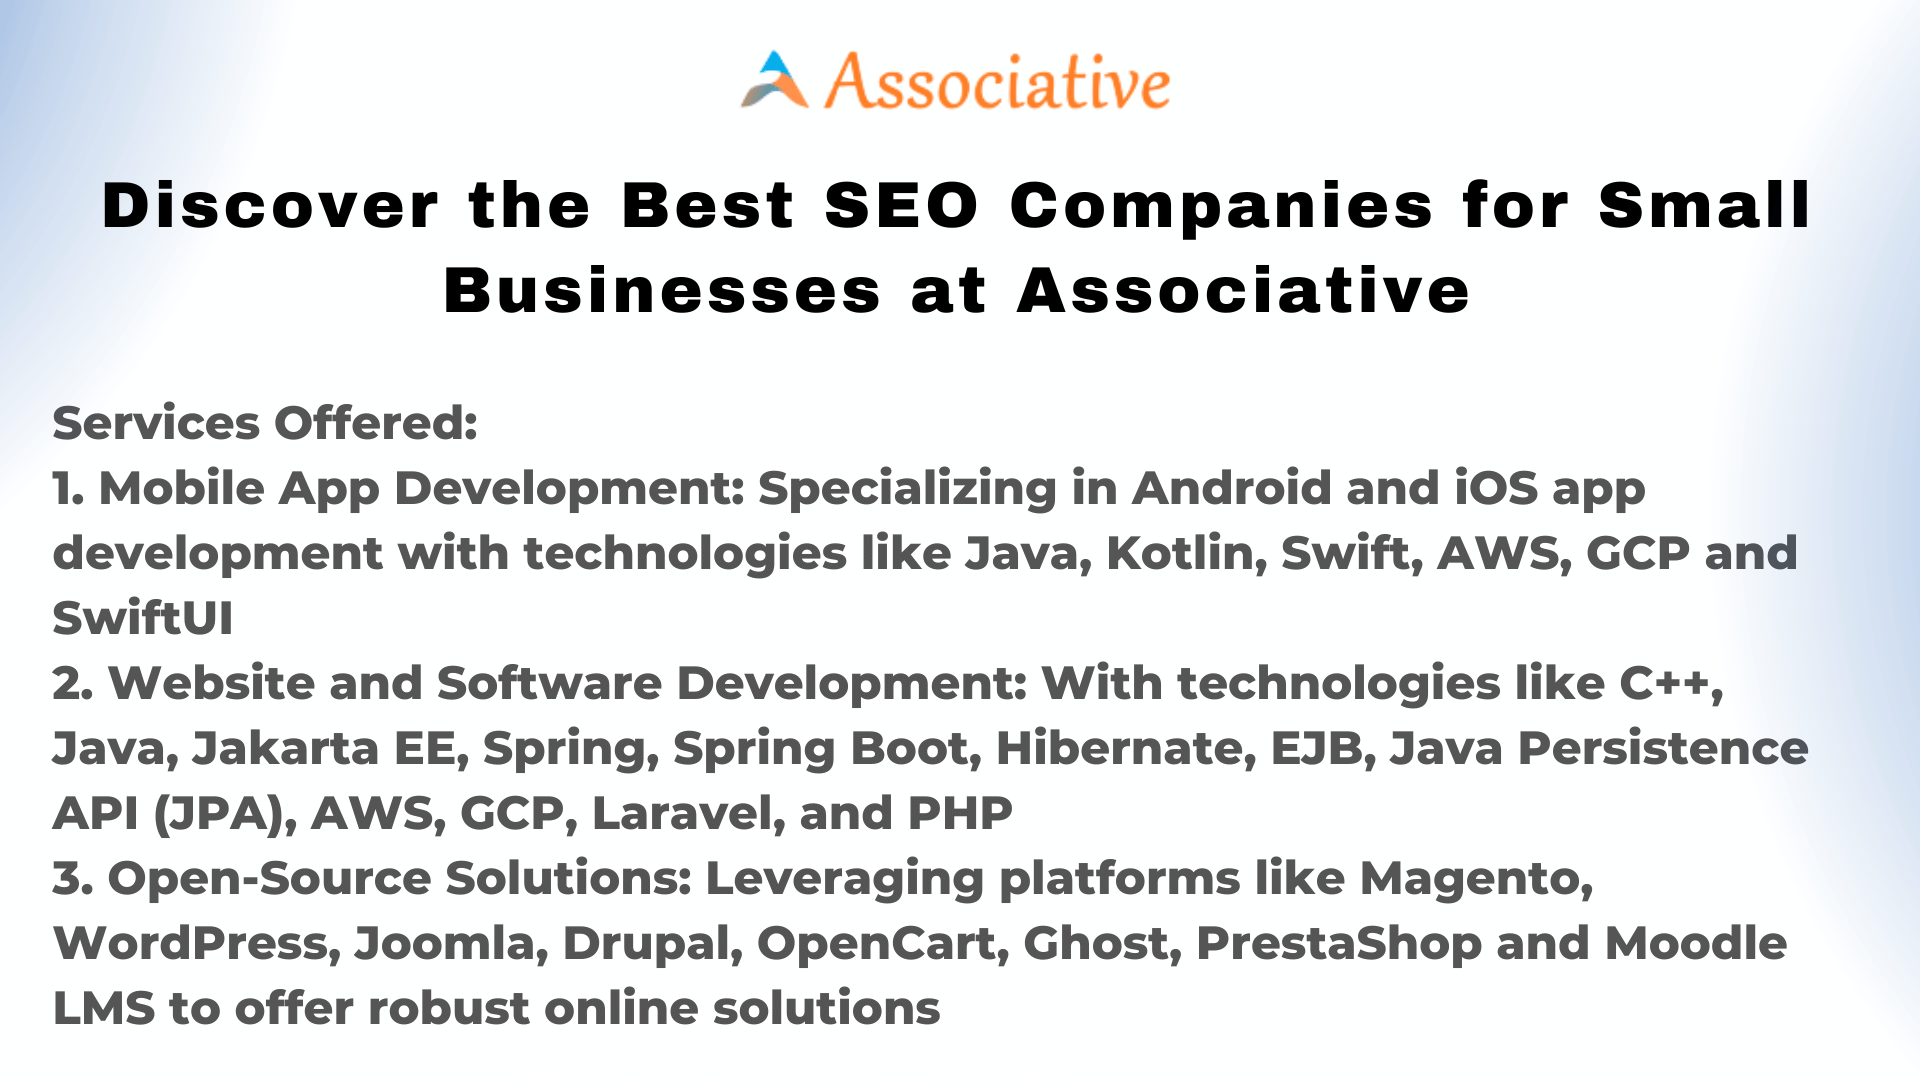 Discover the Best SEO Companies for Small Businesses at Associative